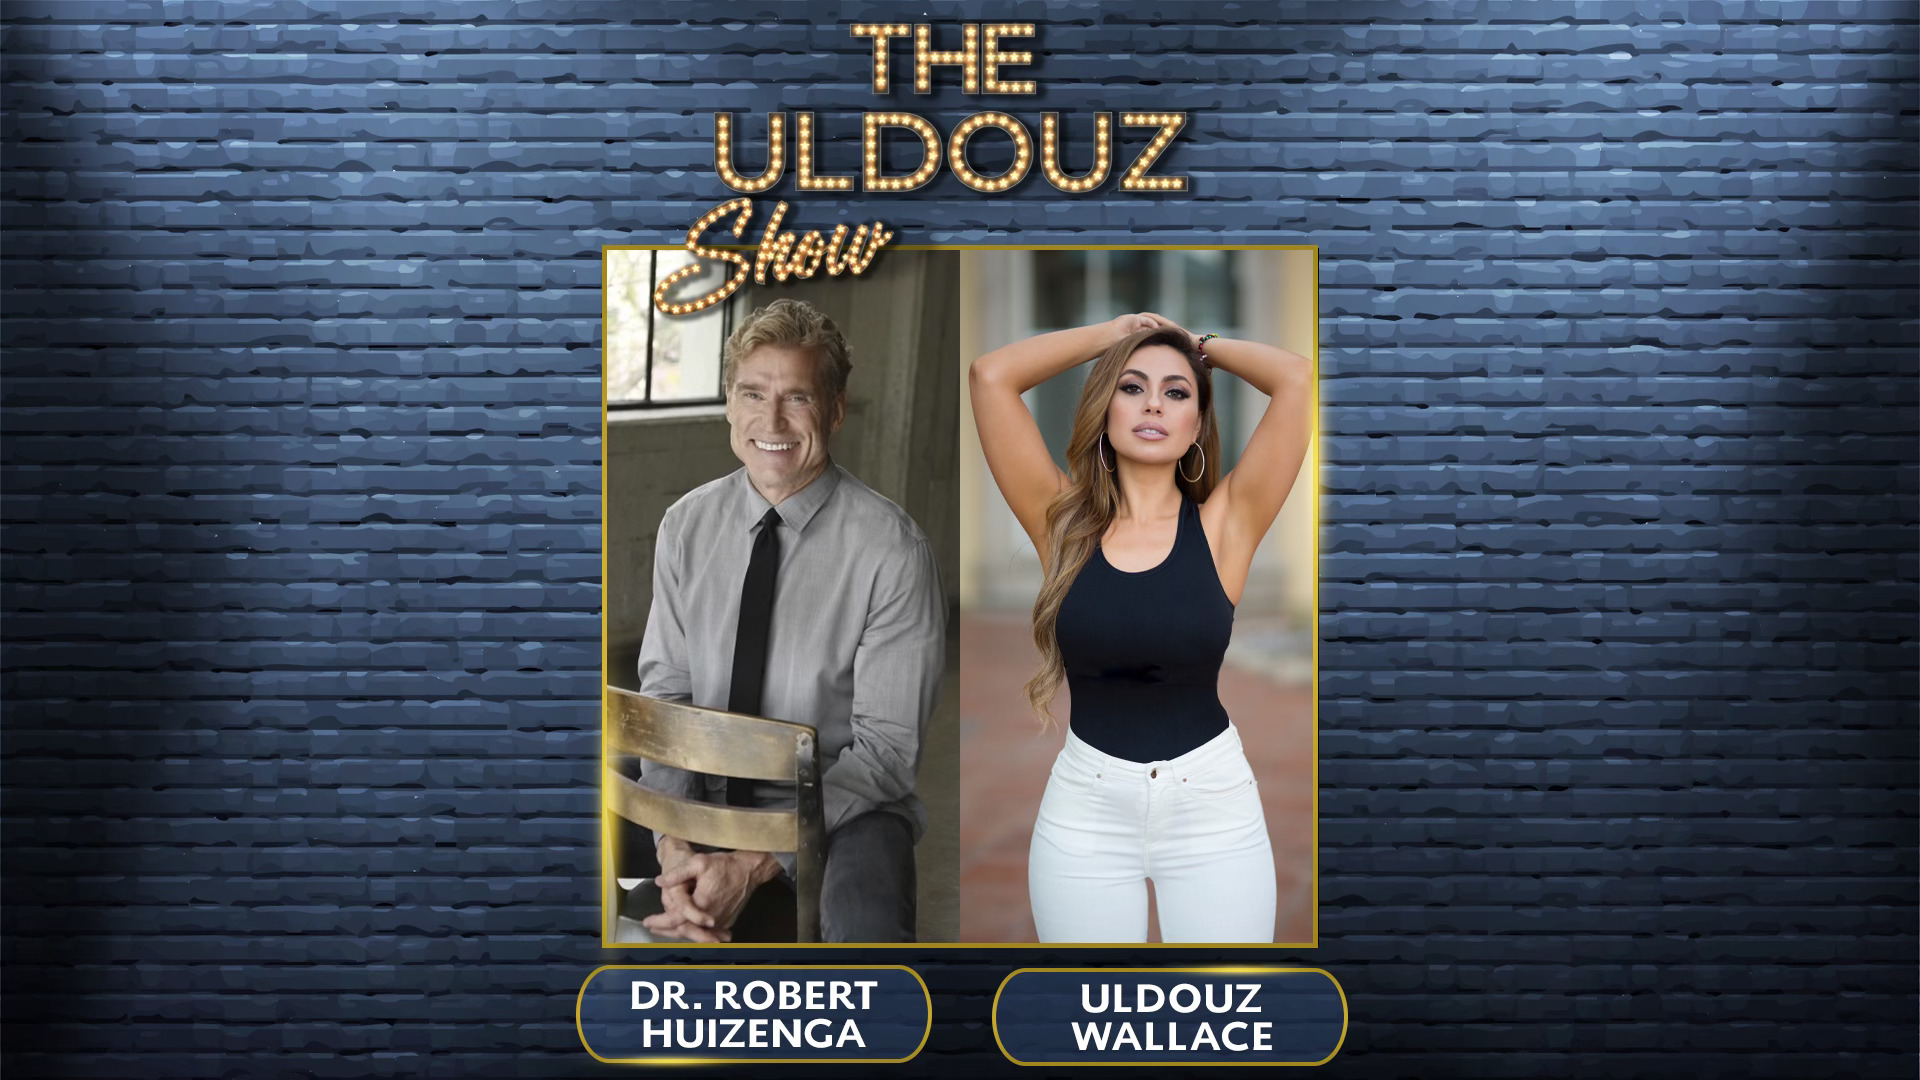 The Uldouz Show with Guest Dr. Robert Huizenga, Biggest Loser, Raiders, Celebrity Dr & Author